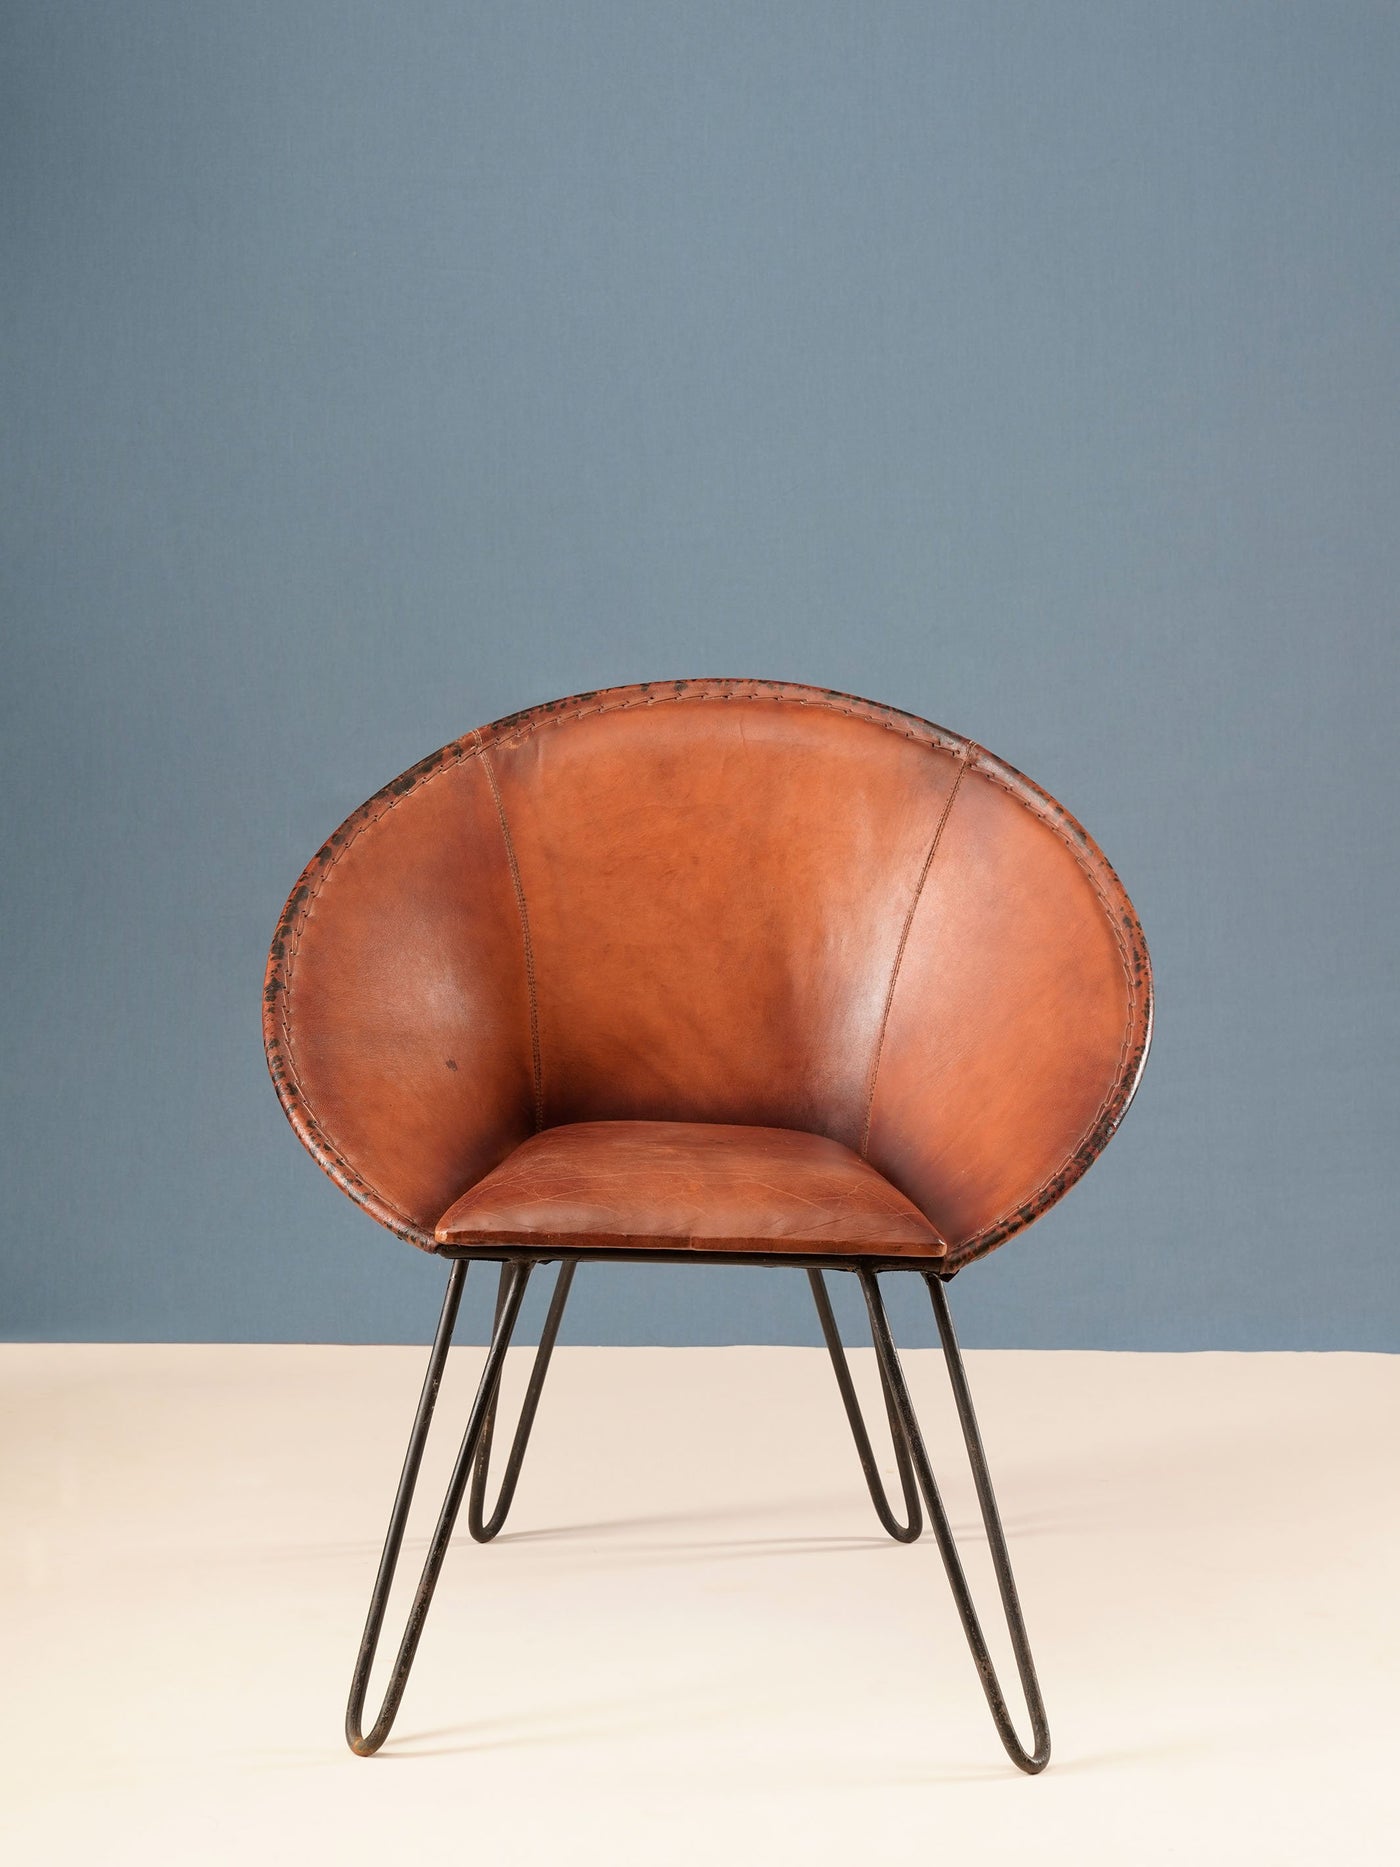 Tufted Leather Scooped Armchair